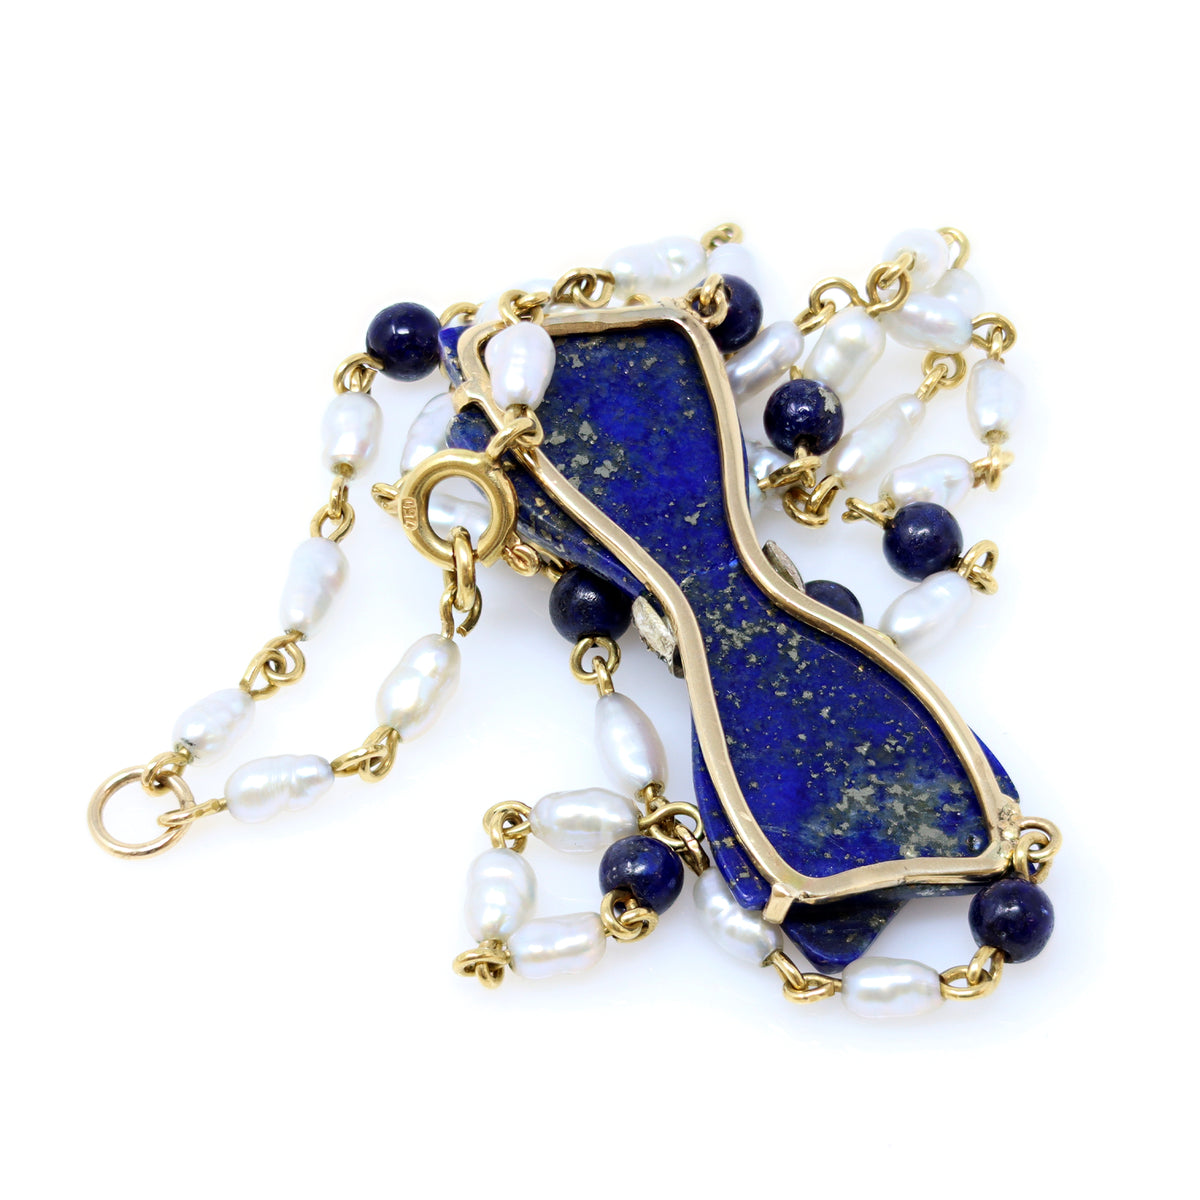 Antique Lapis Lazuli Bow Necklace with Pearls in Yellow Gold